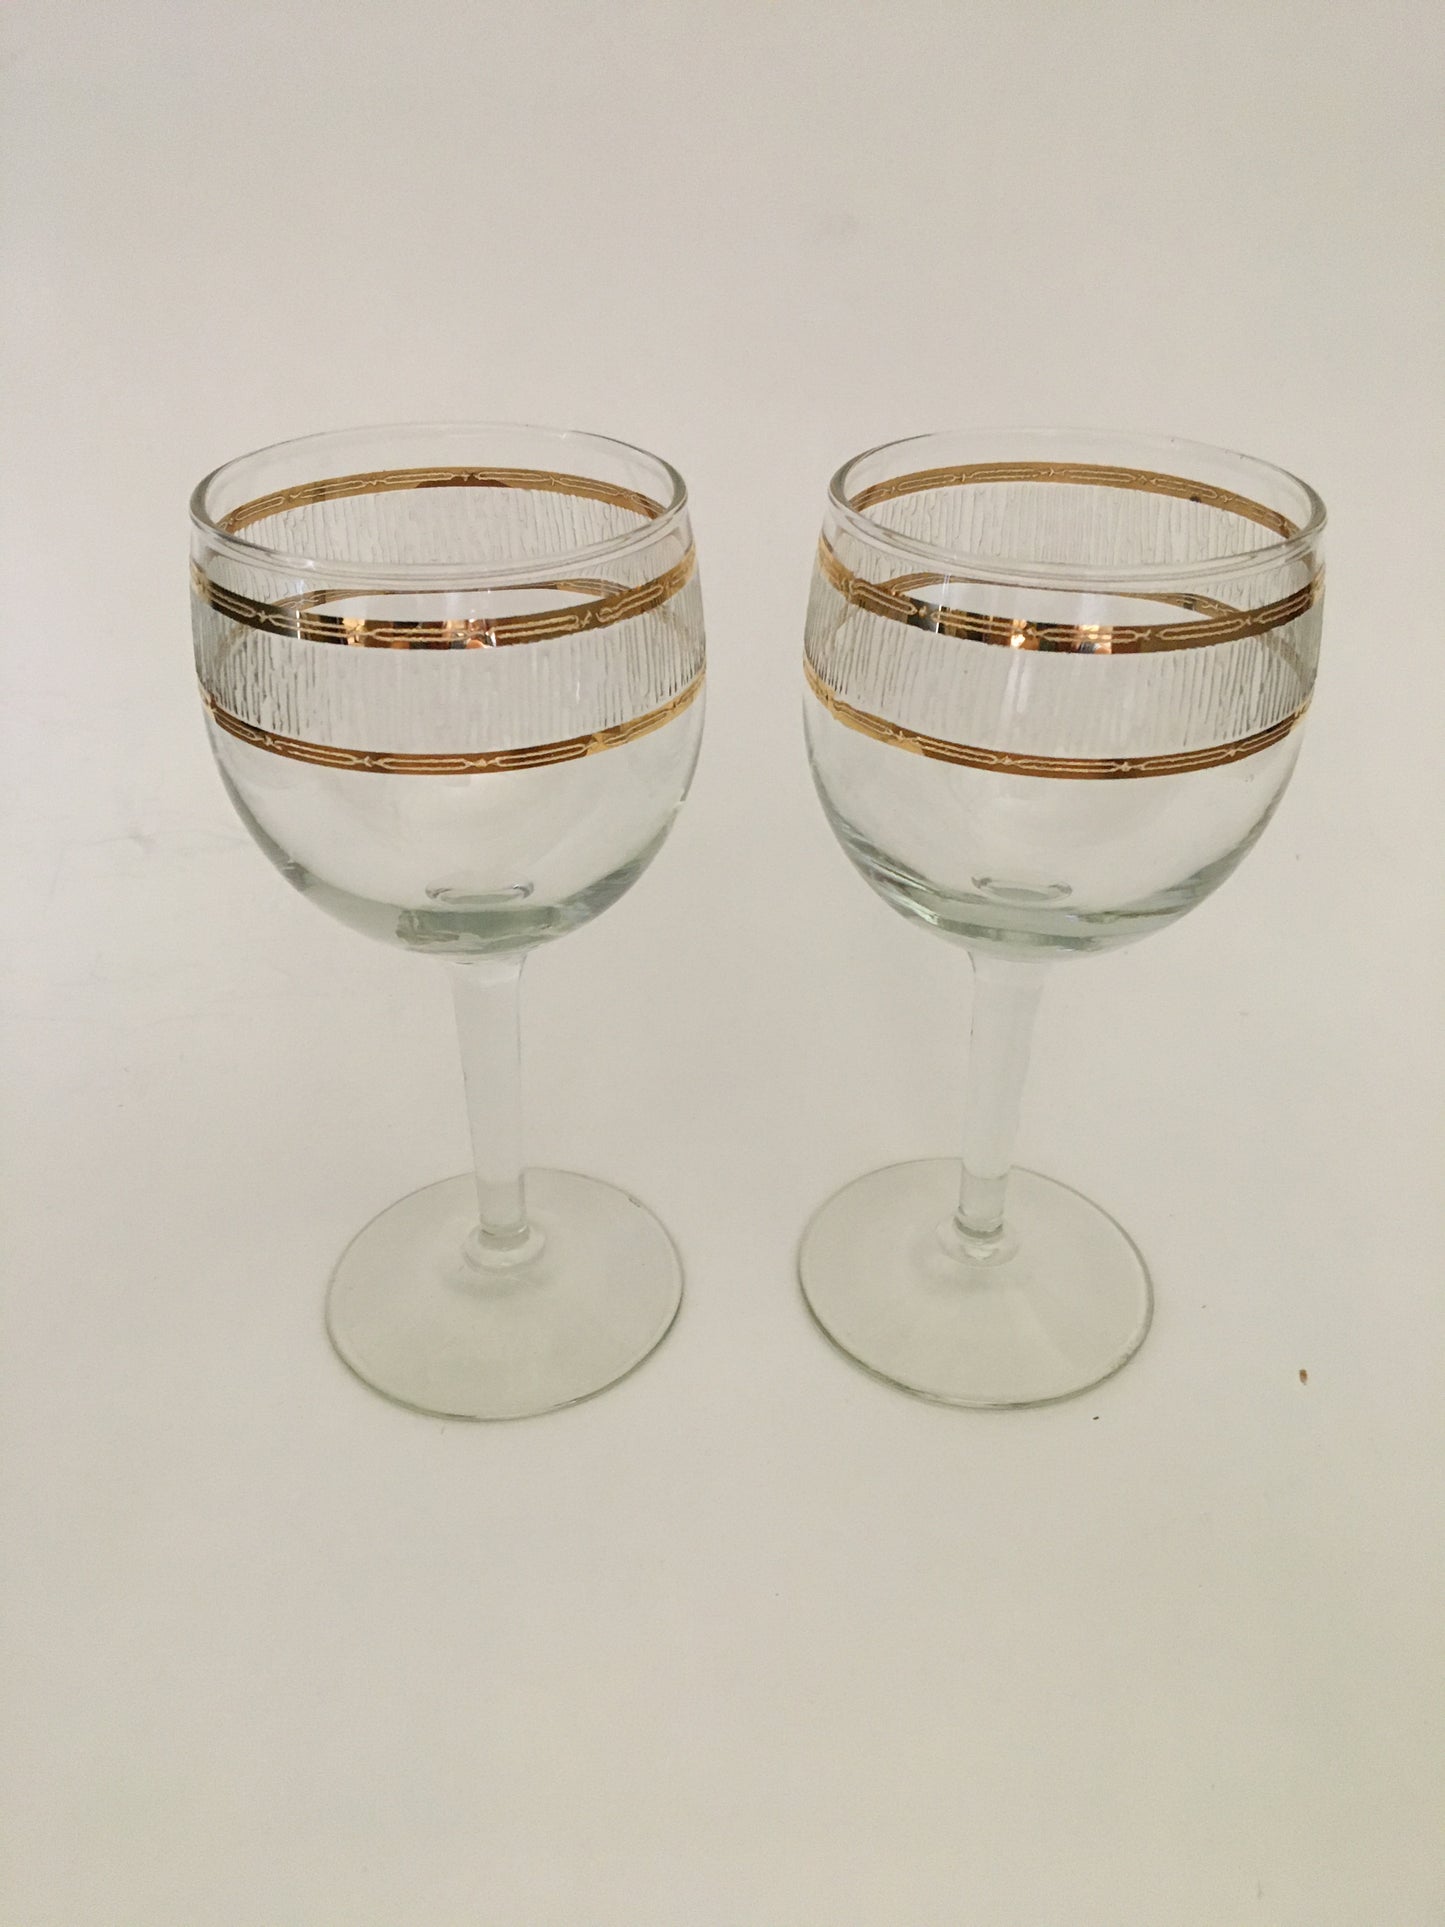 Culver Textured Gold Wine Glasses (2)